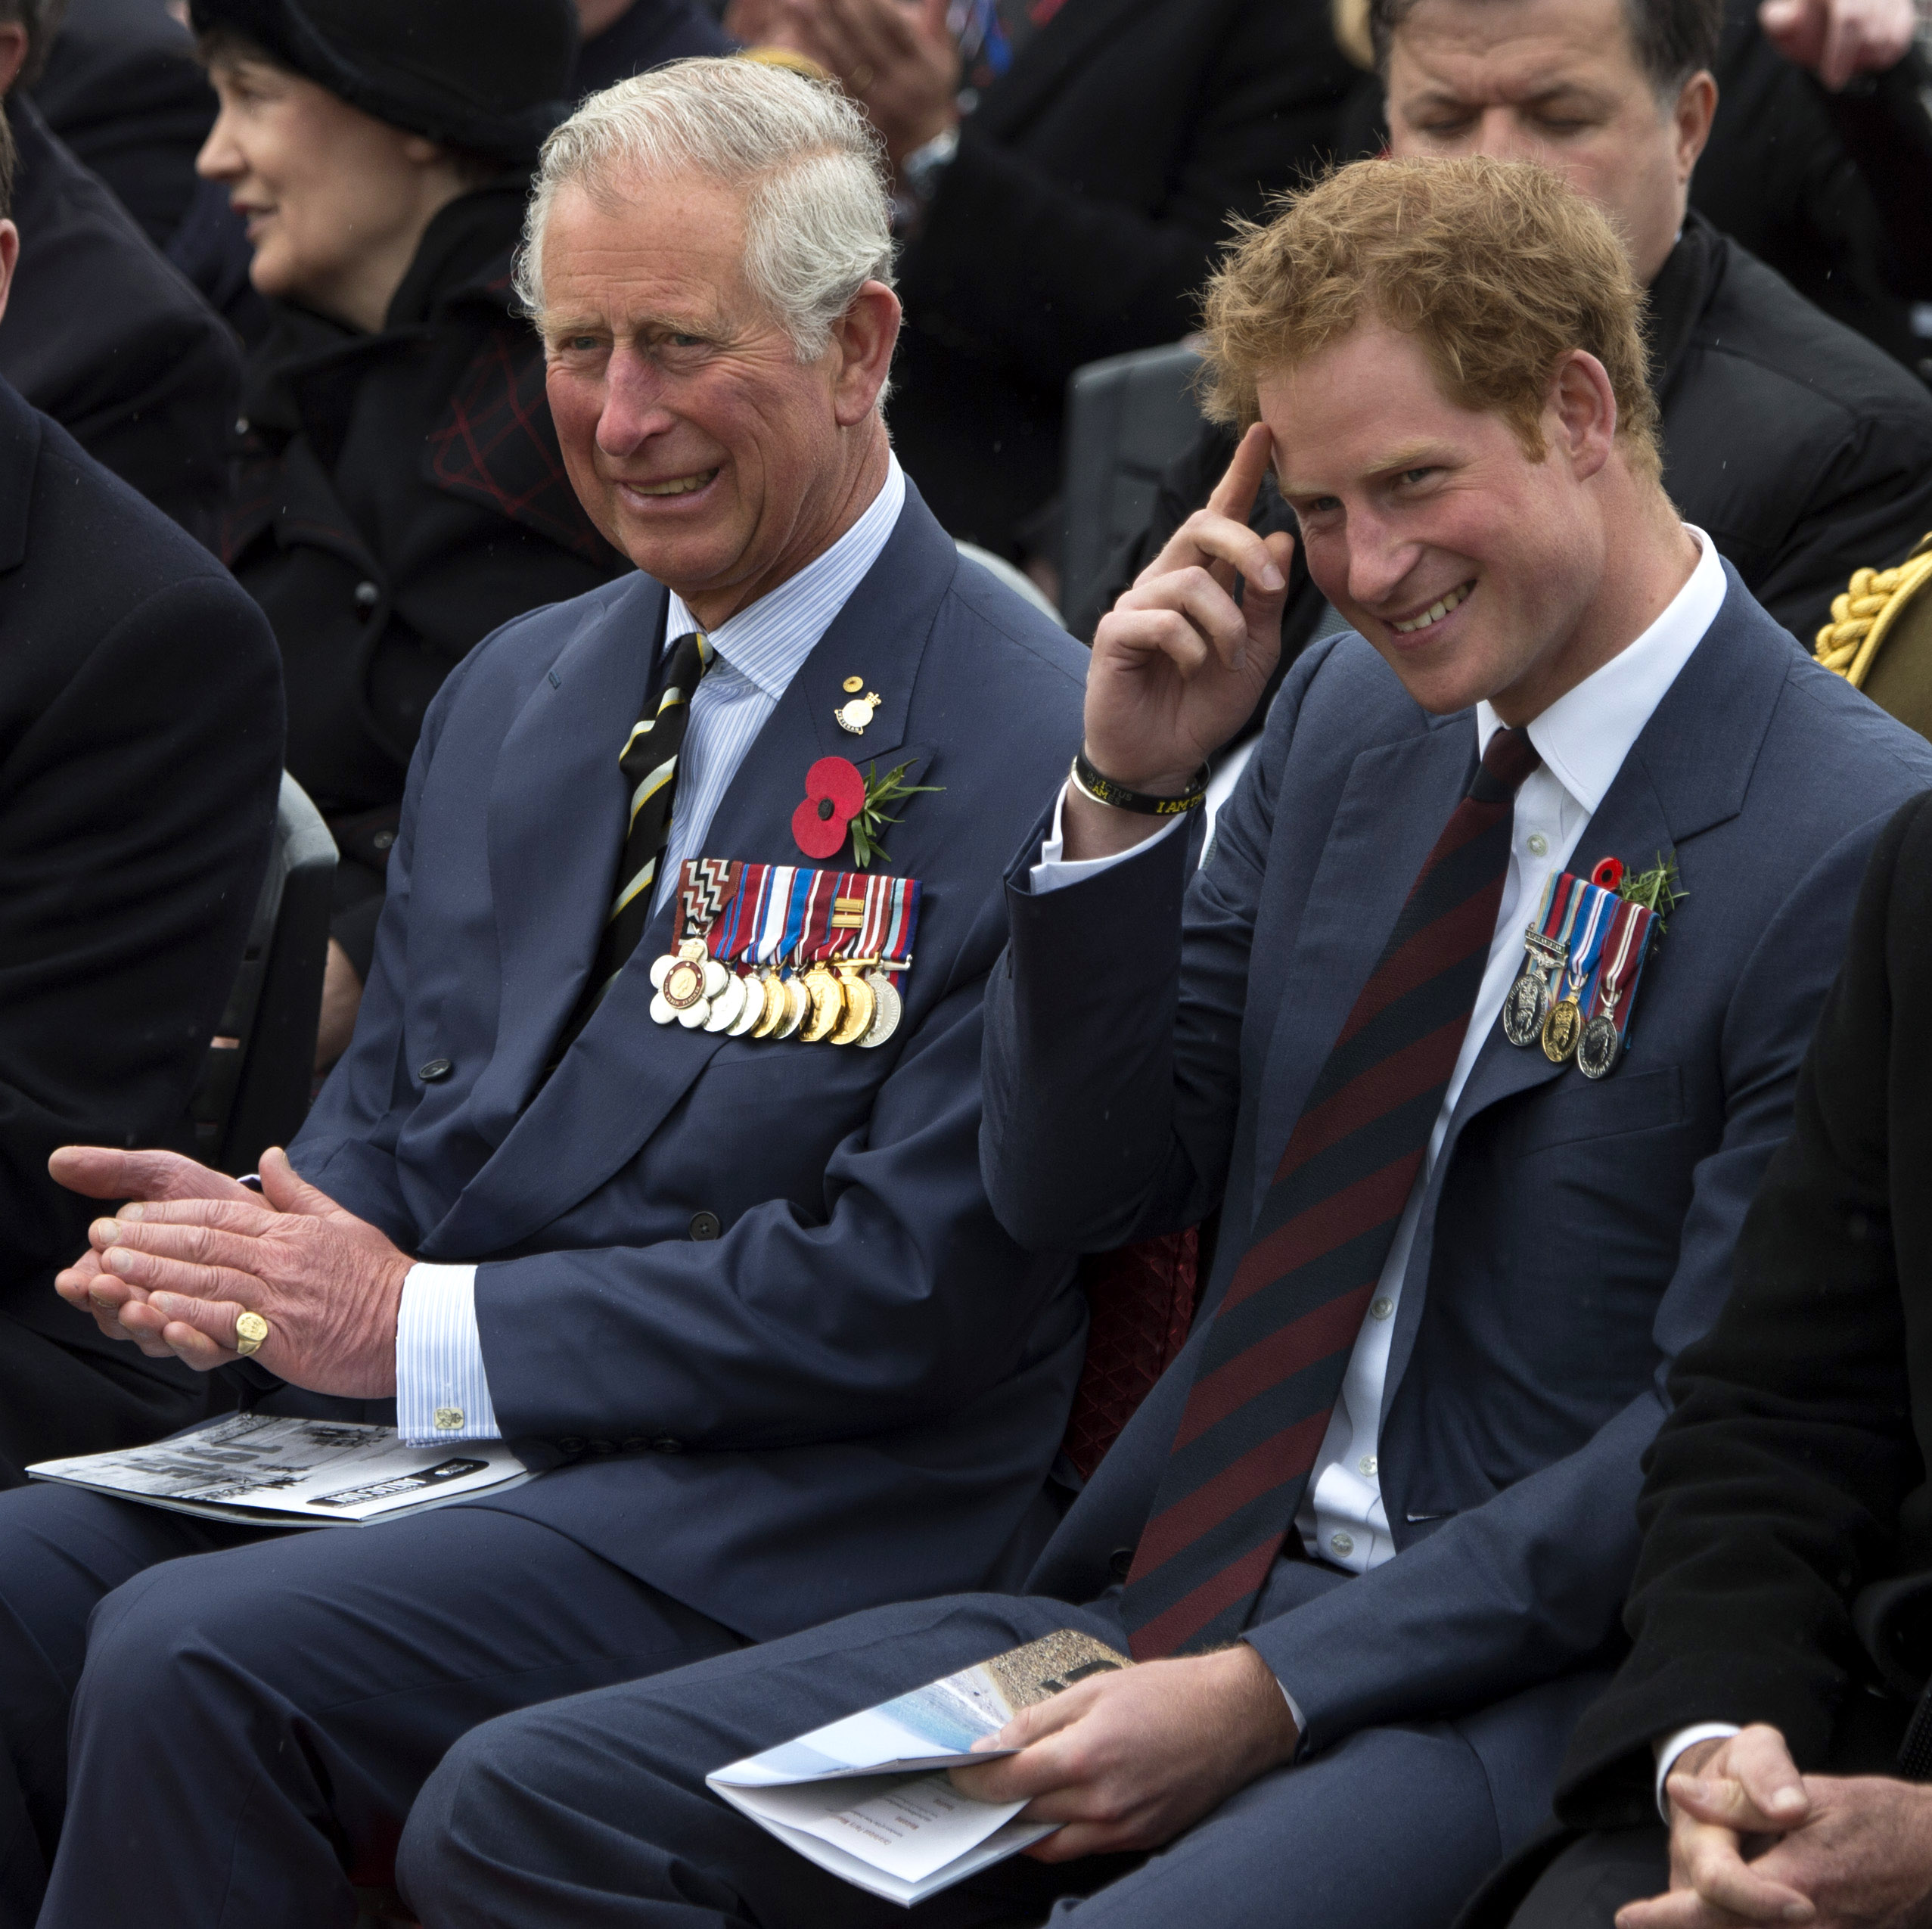 Prince Charles, Prince of Wales and Prince Harry attend the New Zealand Memorial Service at Chunuk Bair in Eceabat, Turkey, on April 25, 2015. | Source: Getty Images